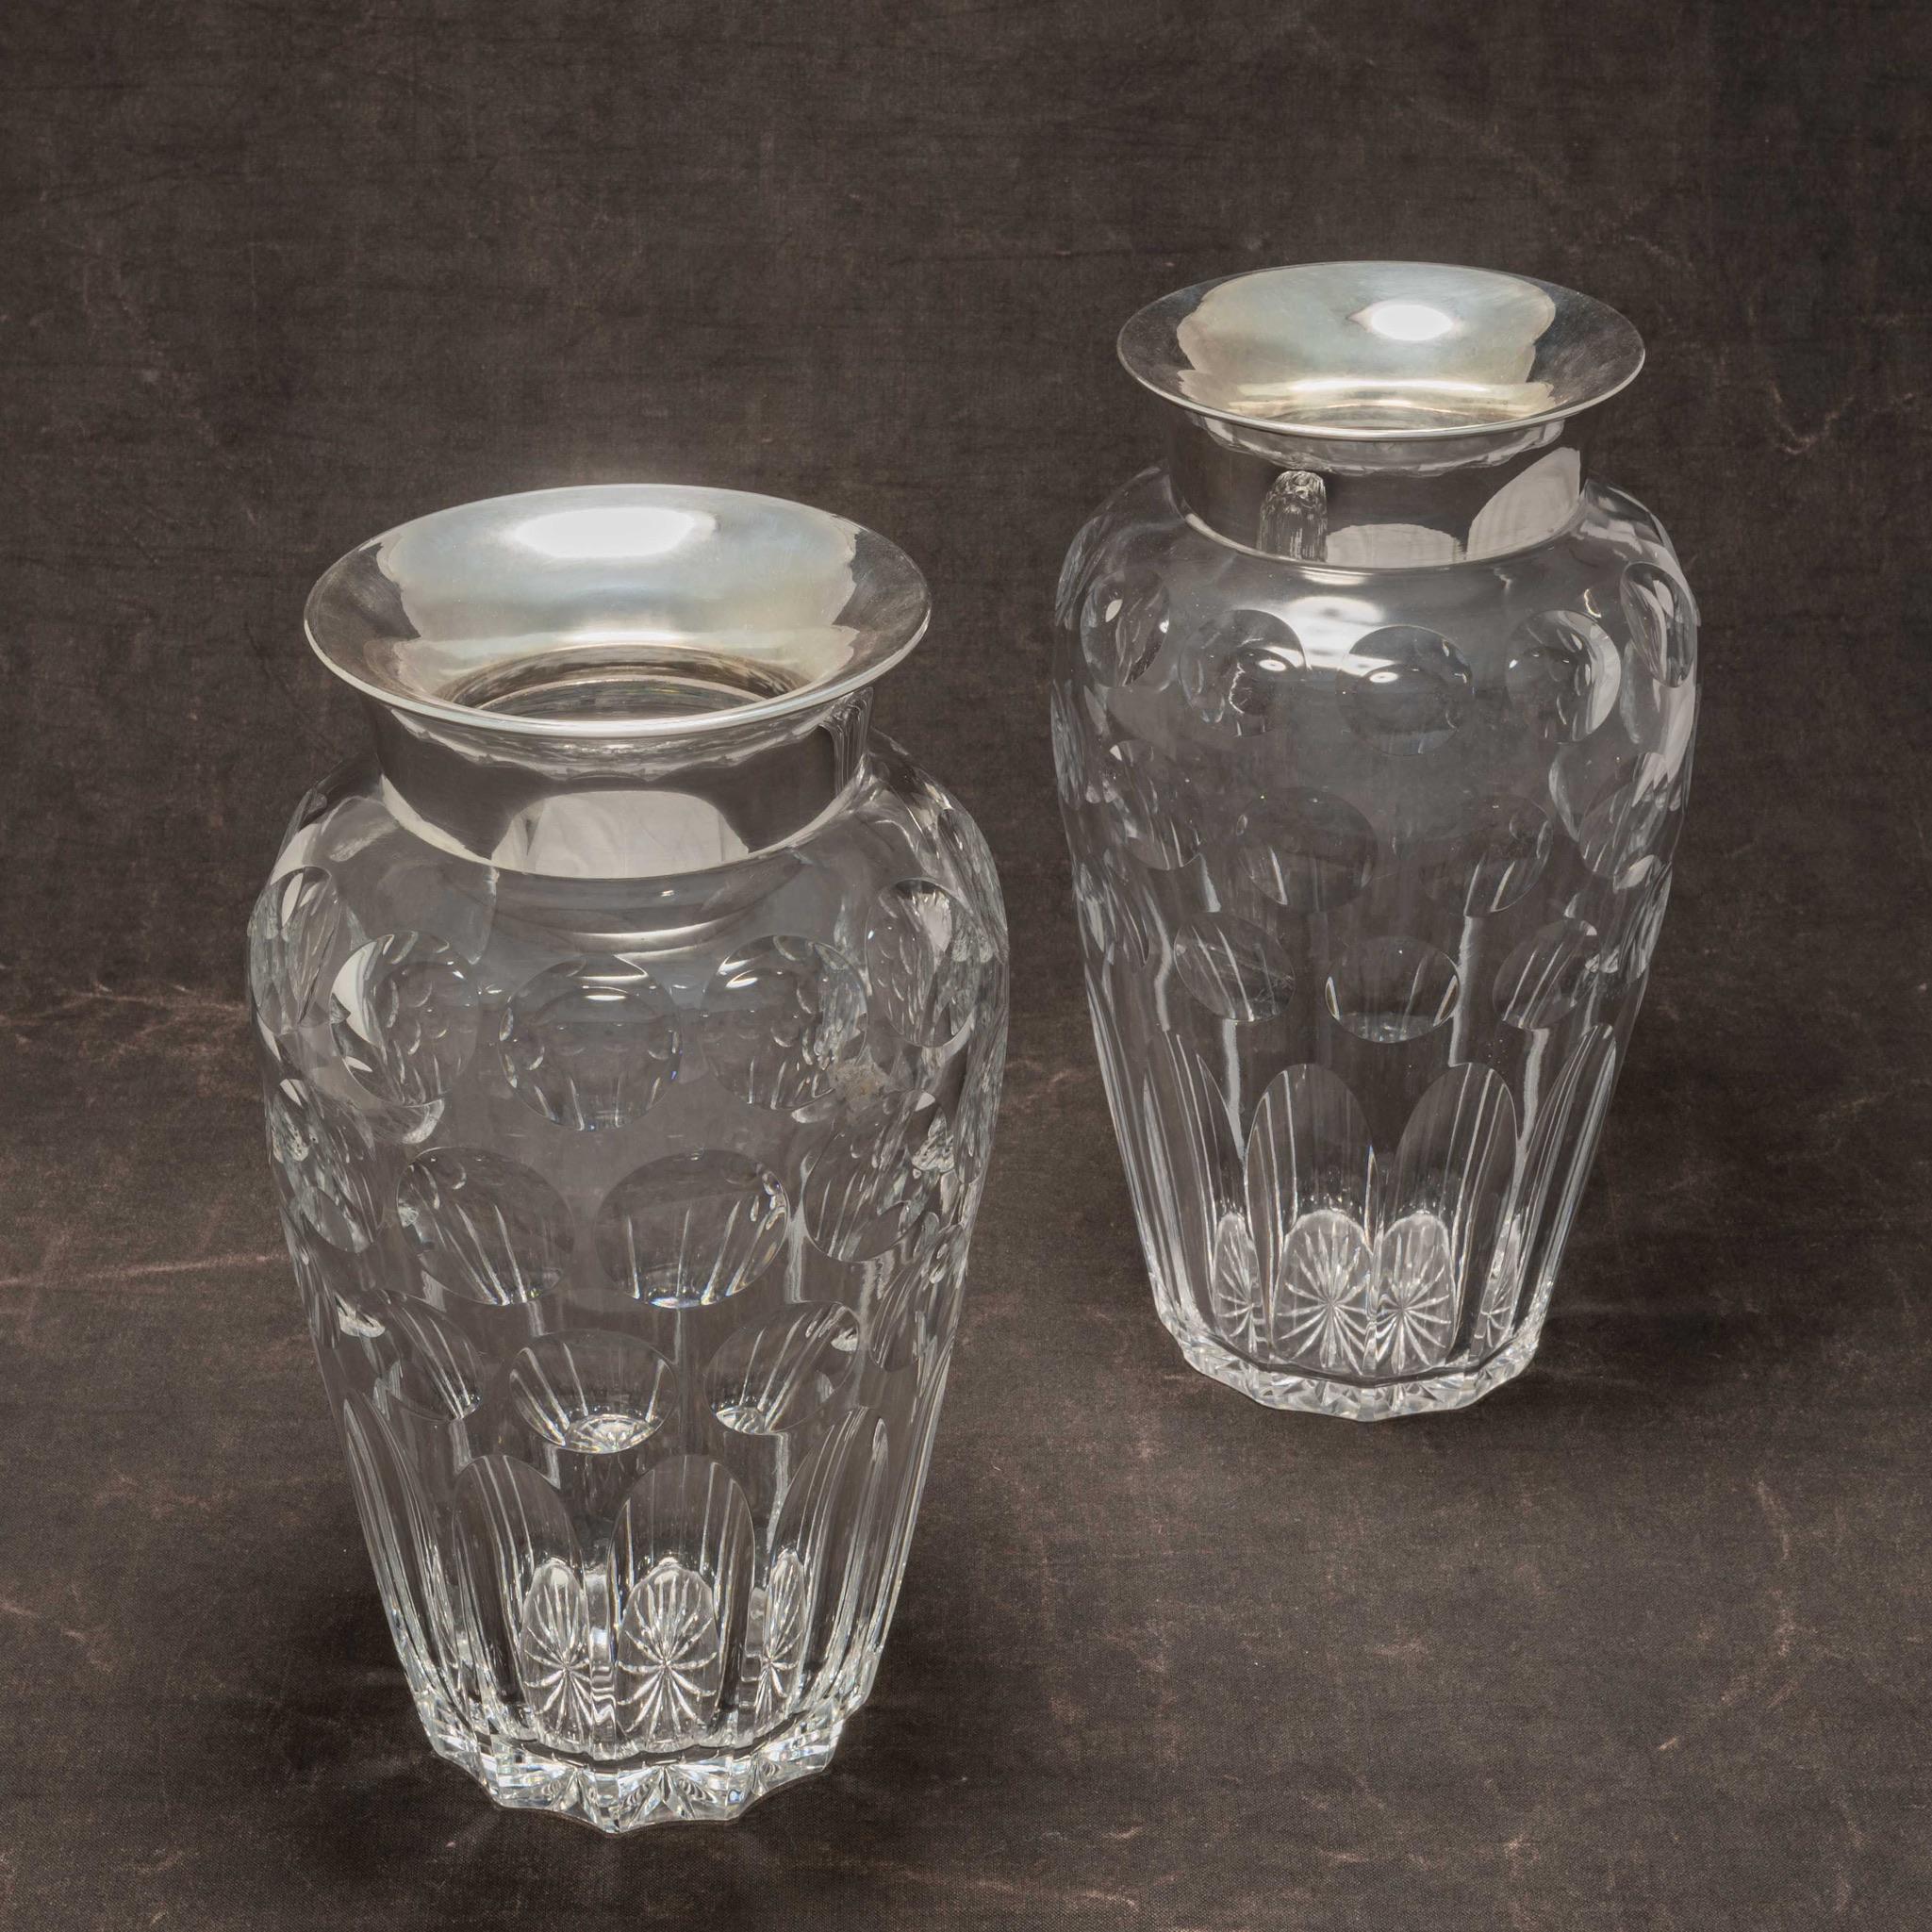 European Superb Pair of Large Cut Glass Vases with Silver Collars, circa 1960s